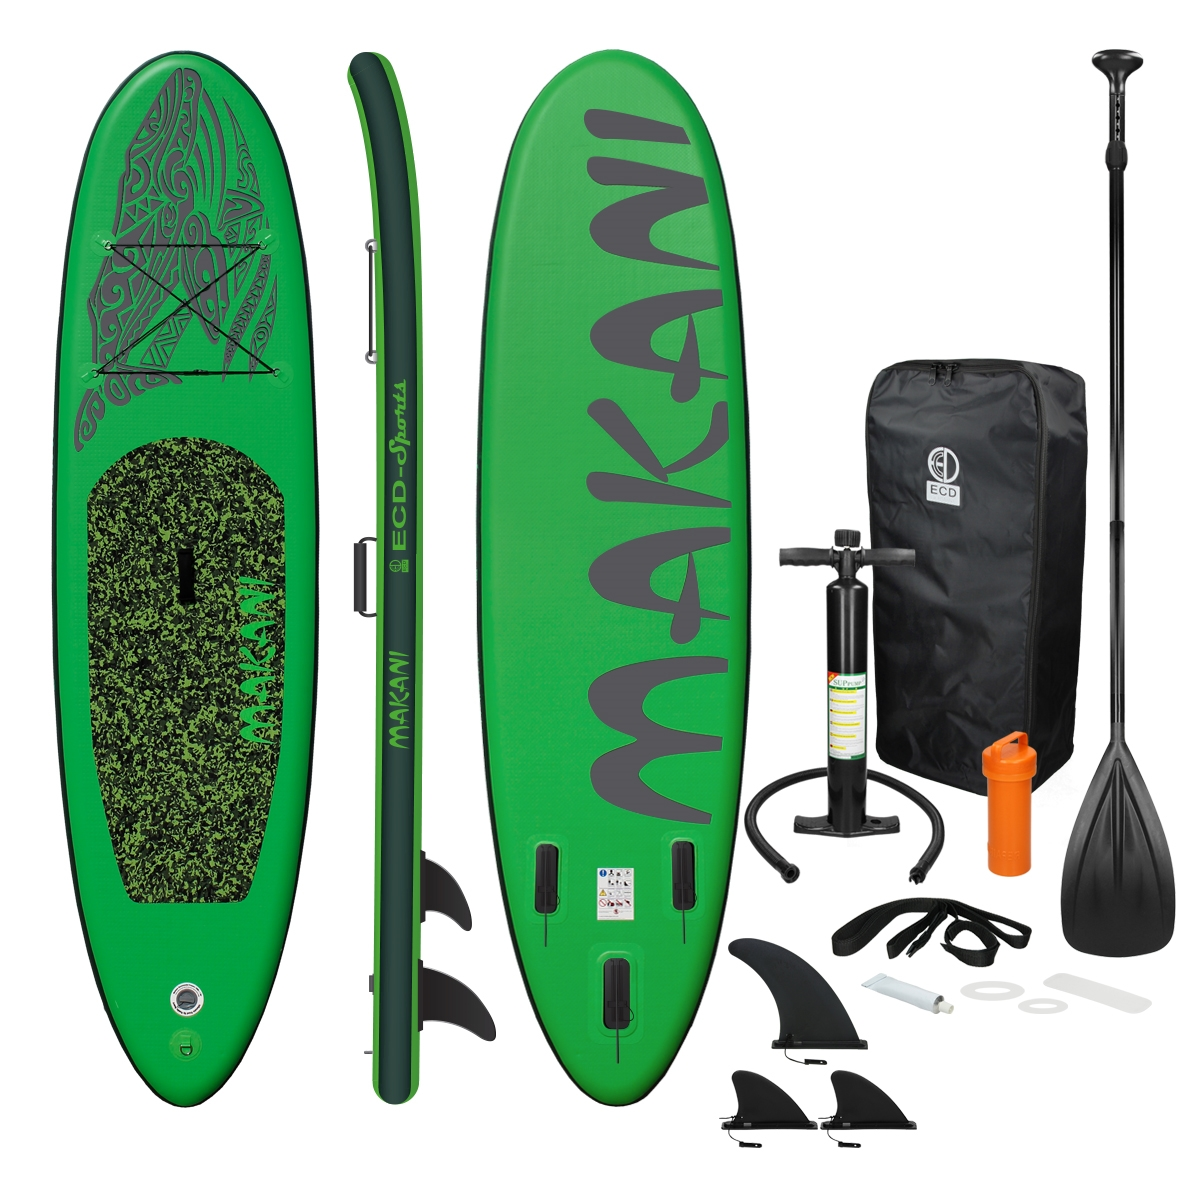 Up Stand Grün Stand Green ECD-GERMANY Paddle, Paddle Up Board